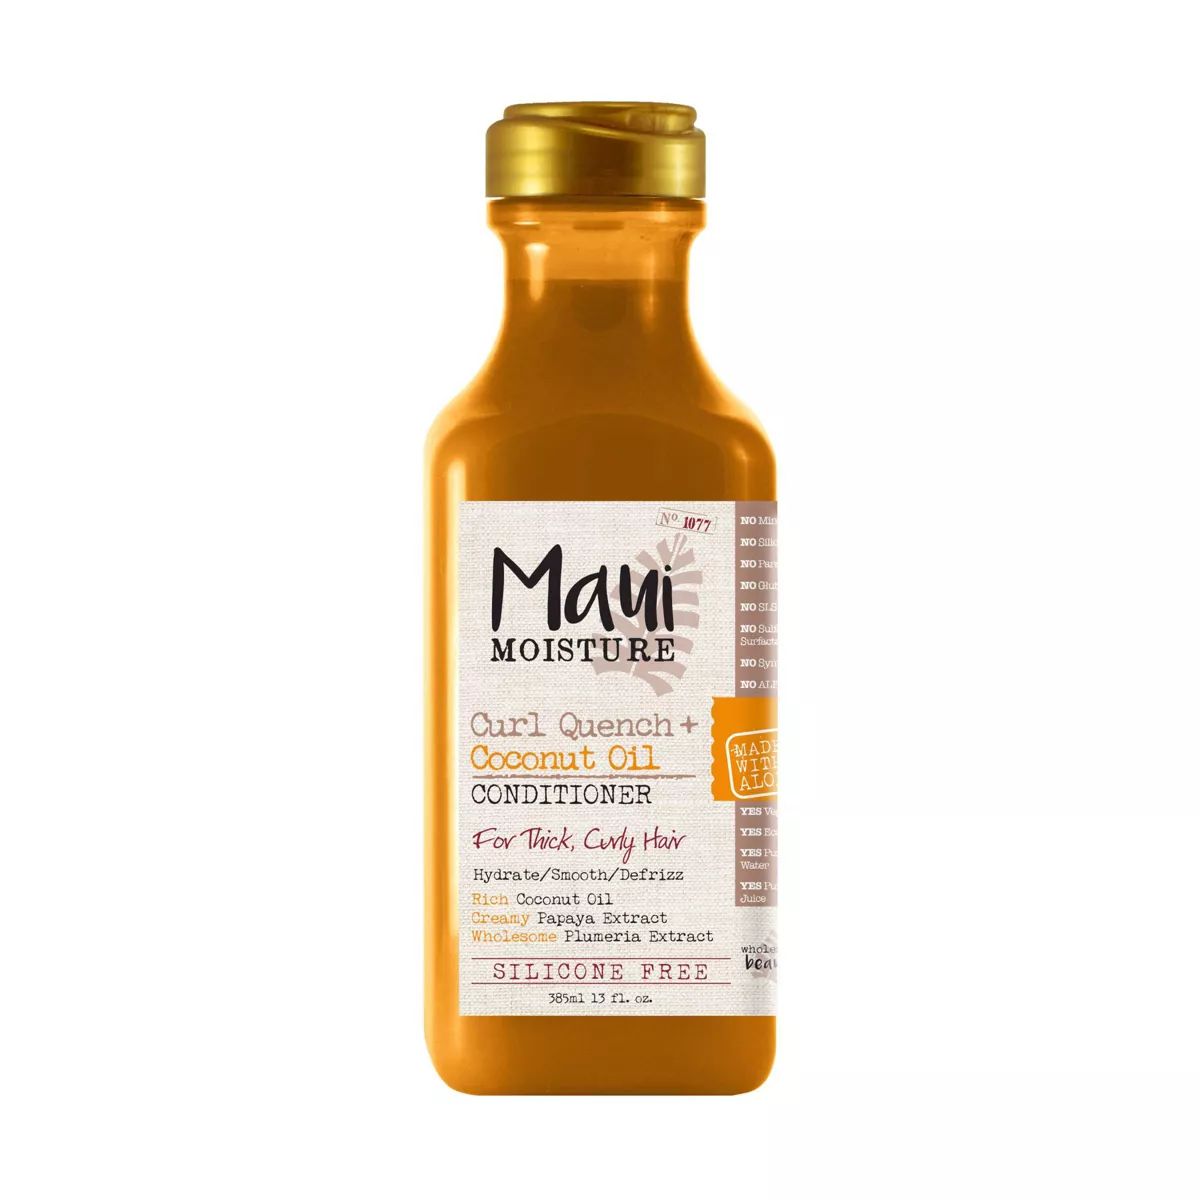 Maui Moisture Curl Quench + Coconut Oil Conditioner for Thick Curly Hair - 13 fl oz | Target